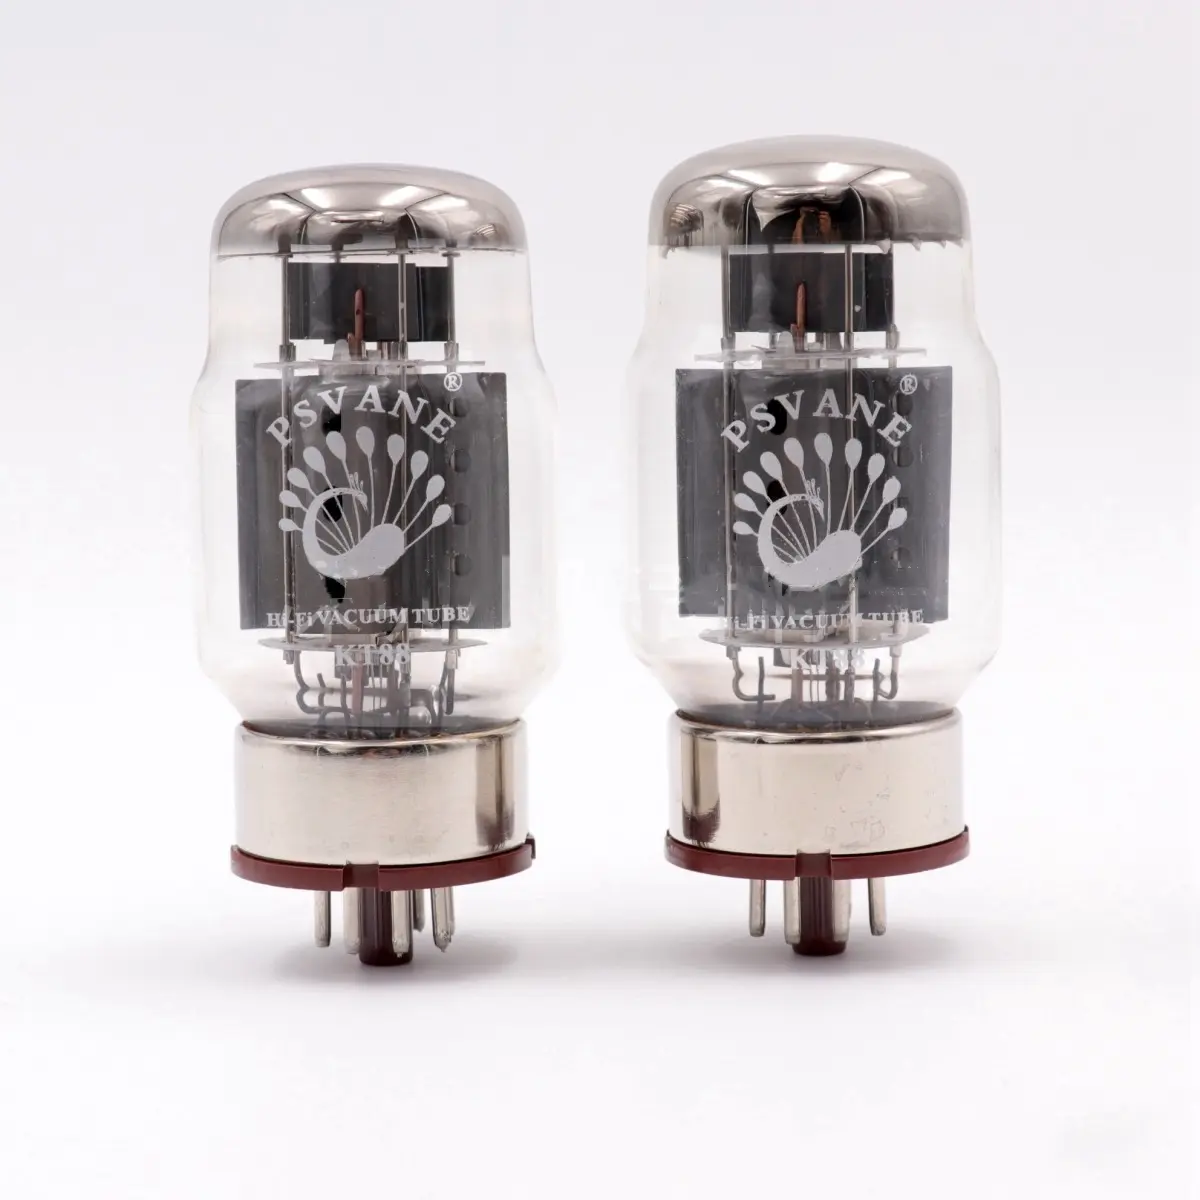 Matched Quad 6550 ShuGuang KT88 HiFi Vacuum Tube Amplifier New Tested Old Stock 